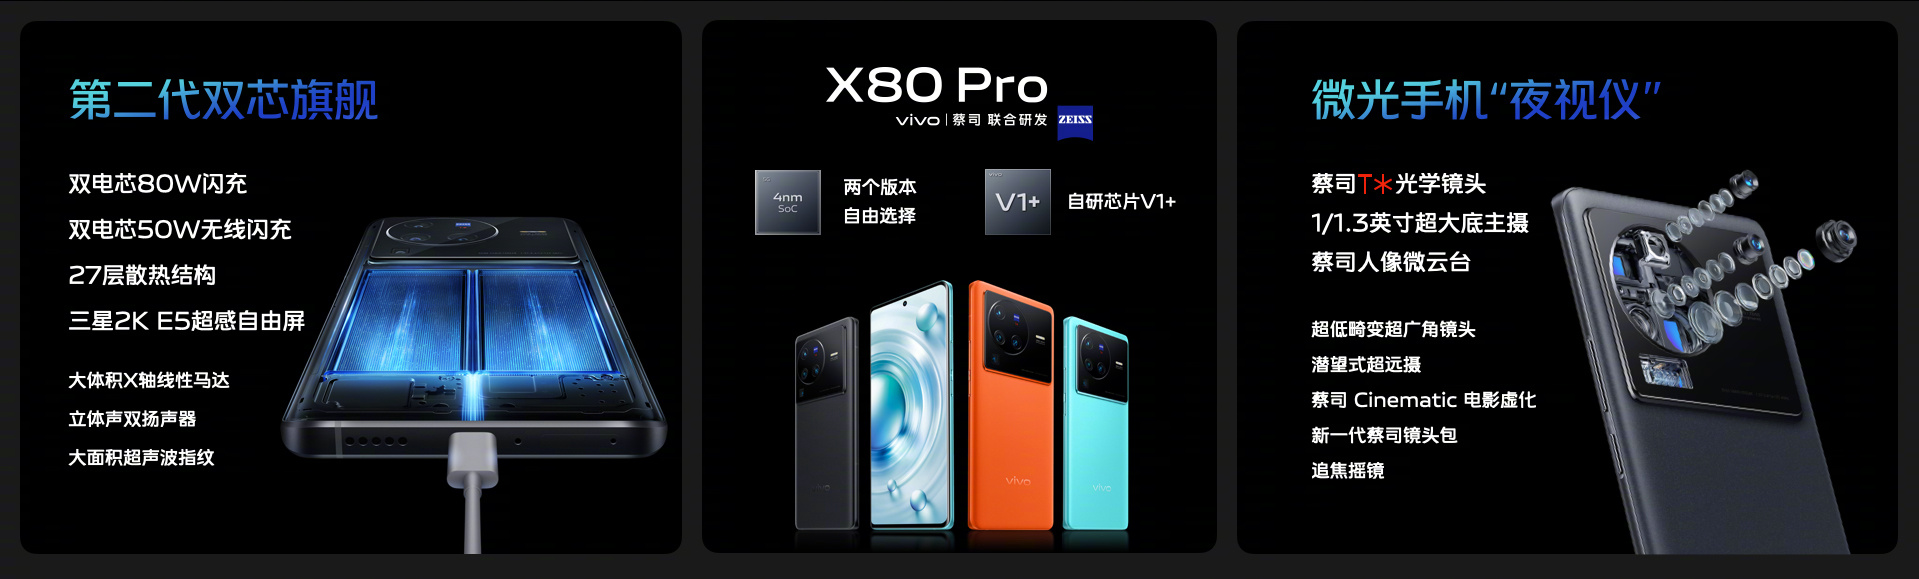 Vivo Unveils X80 Series, Two Chipset Options for X80 Pro - Pandaily